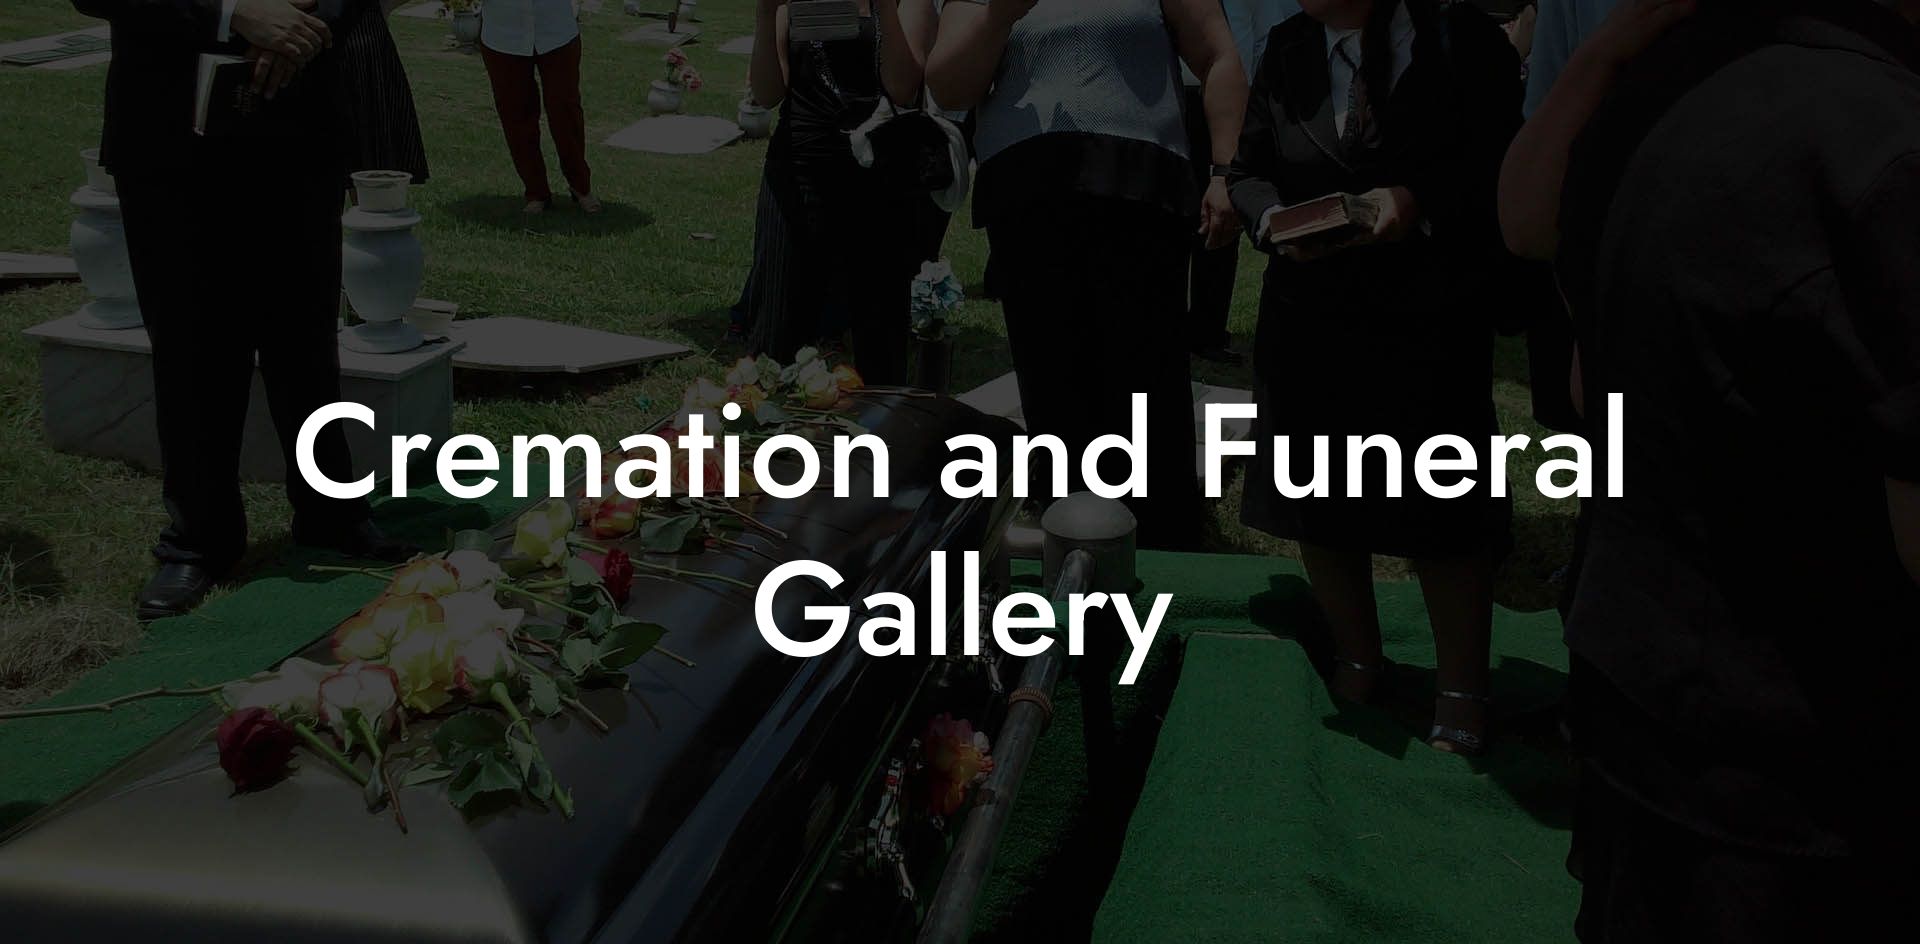 Cremation and Funeral Gallery